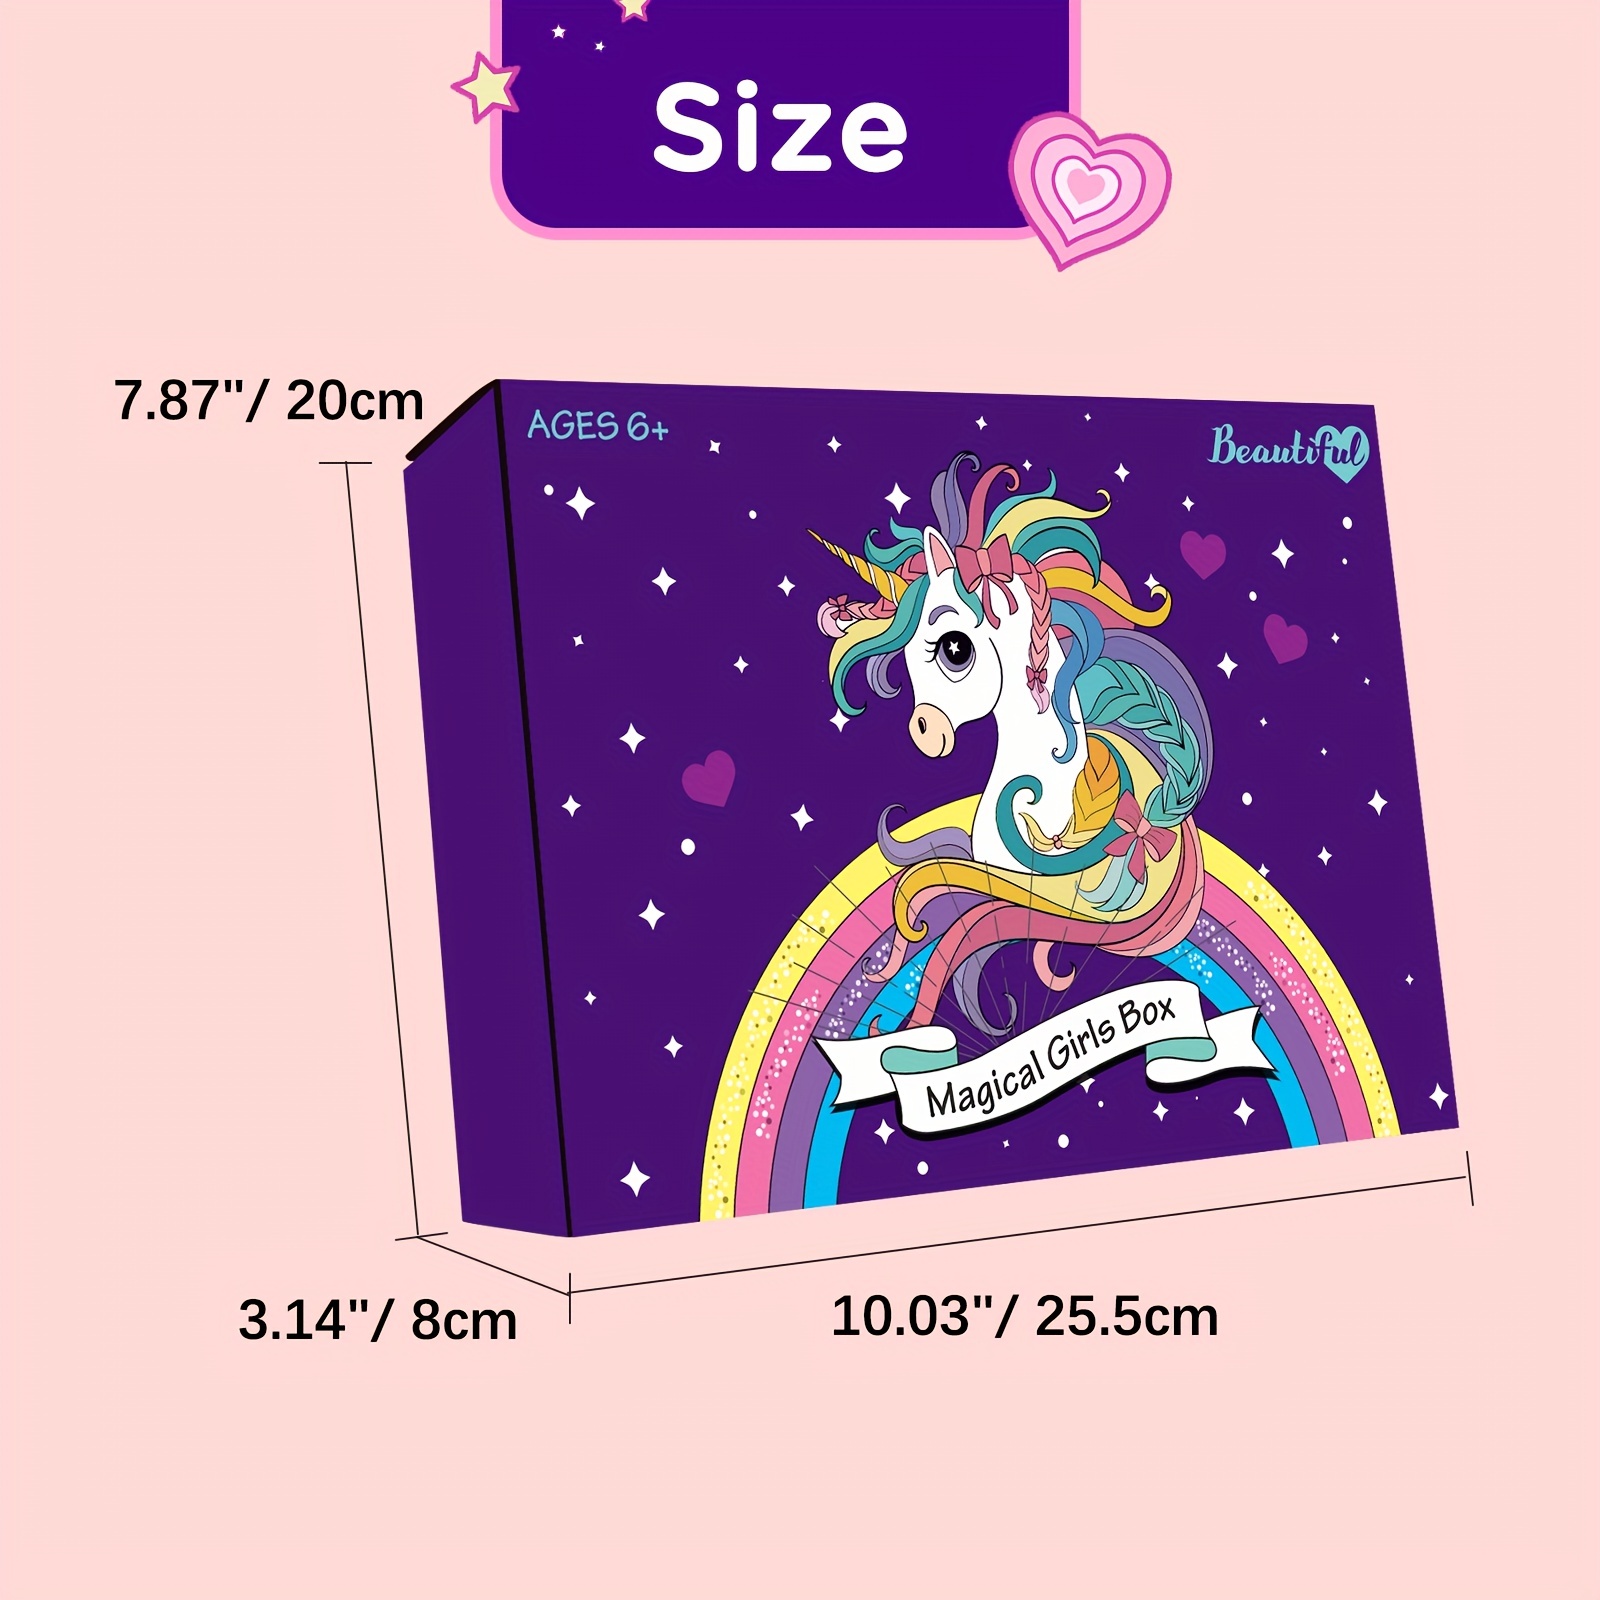 Unicorn Stationery Set for Kids - Unicorn Gifts for Girls Ages 6, 7, 8, 9,  10-12 Year Old Age - Stationary Letter Writing Art Kit $200